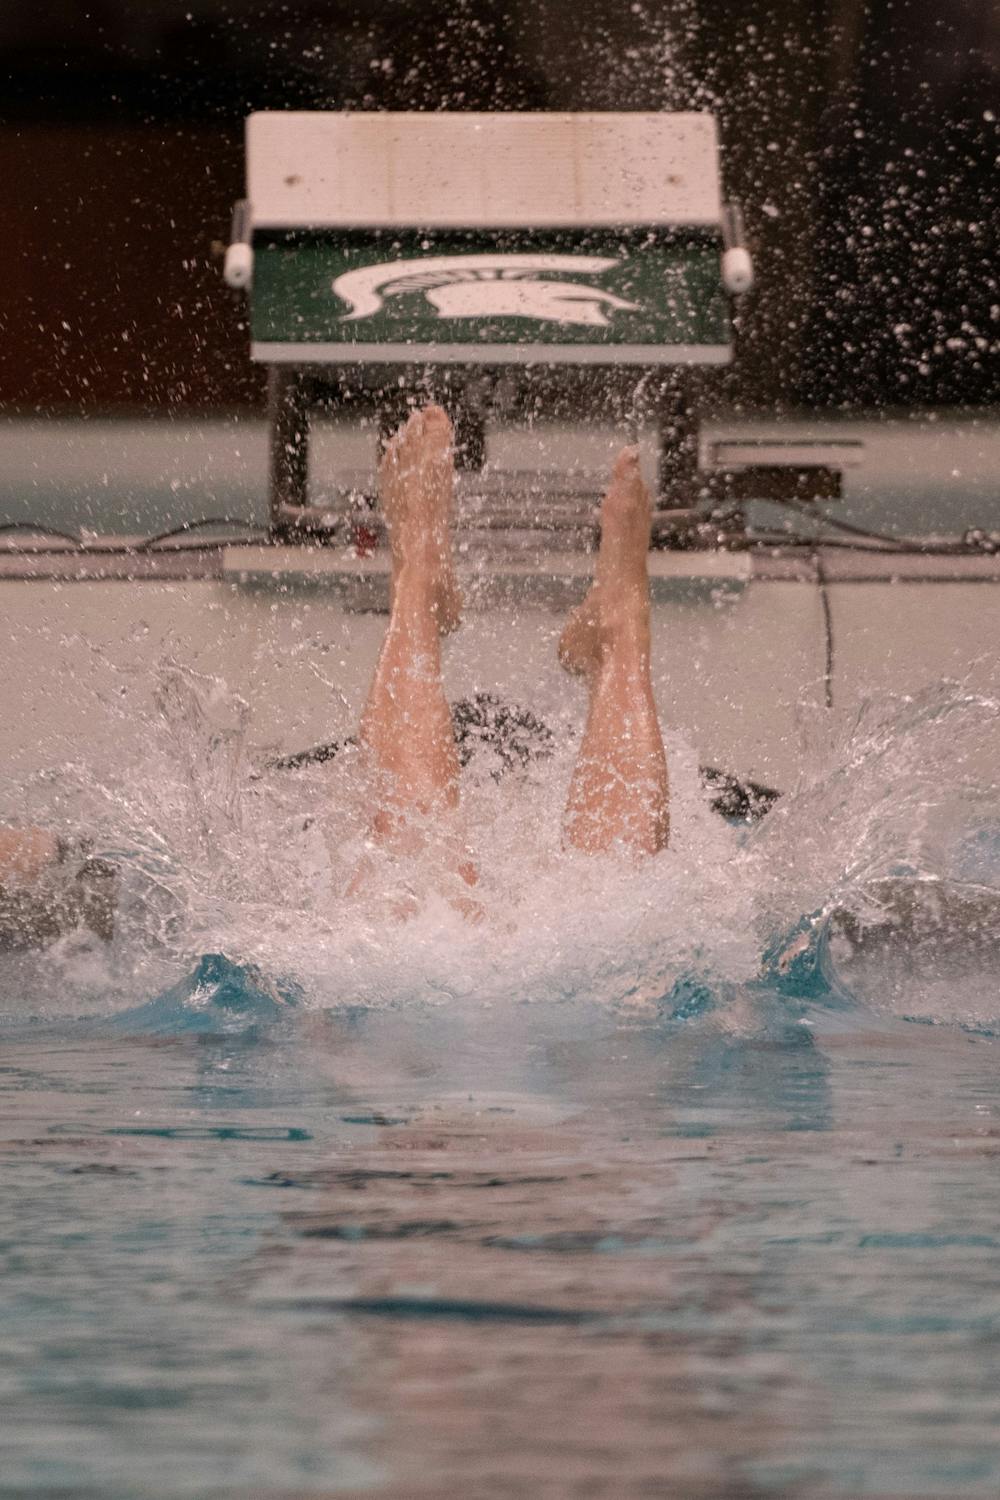 Junior Weston Youngblood enters the pool during the meet against Cleveland State Jan. 24, 2020 at McCaffree Pool. The Spartans defeated the Vikings, 163.5-135.5.